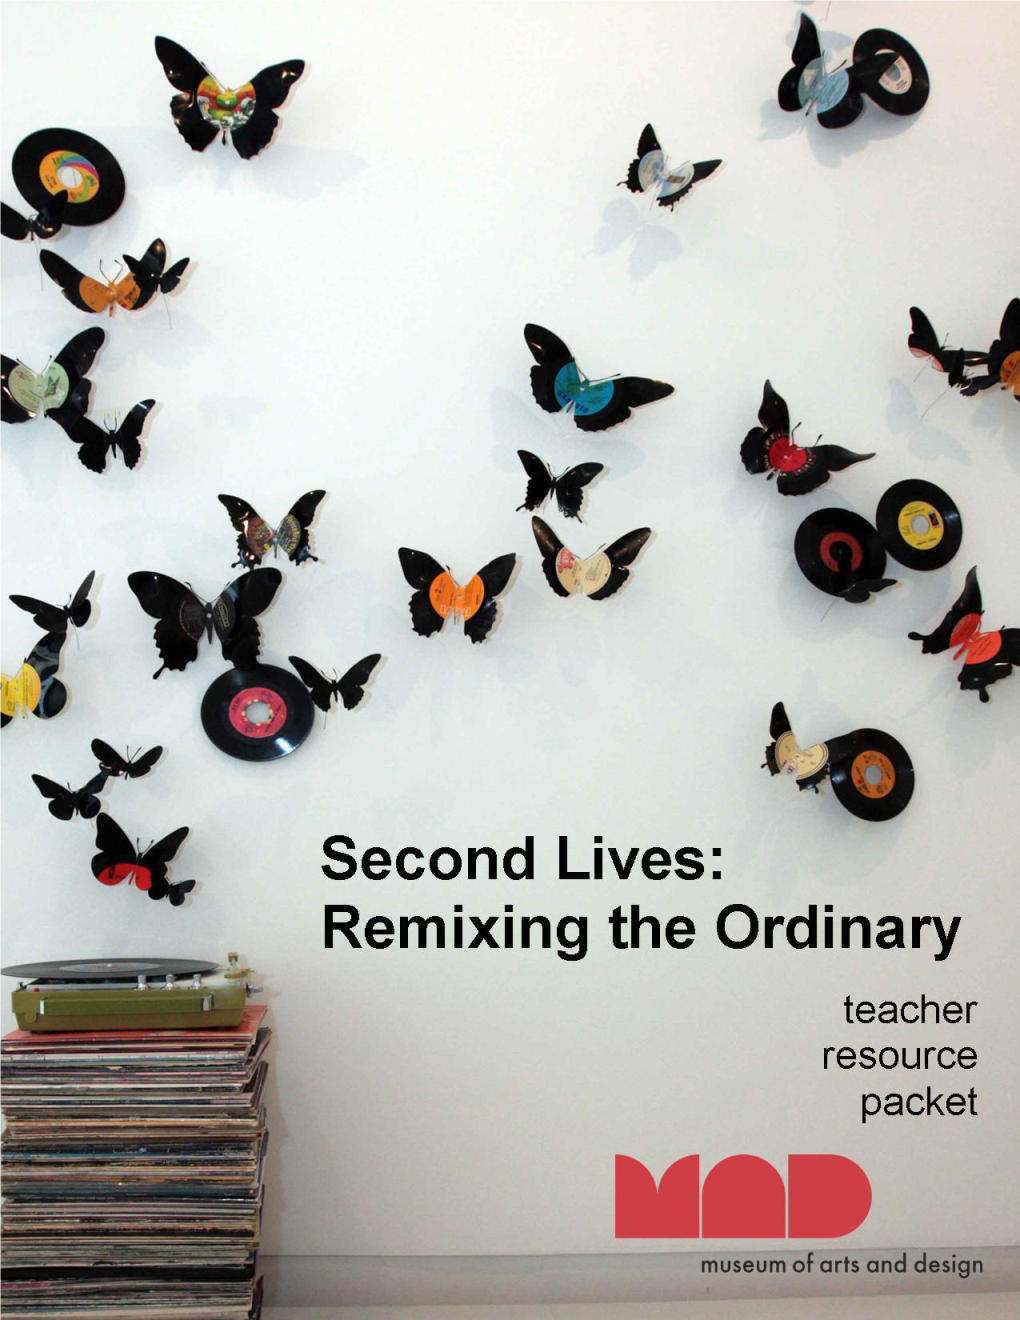 Second Lives: Remixing the Ordinary